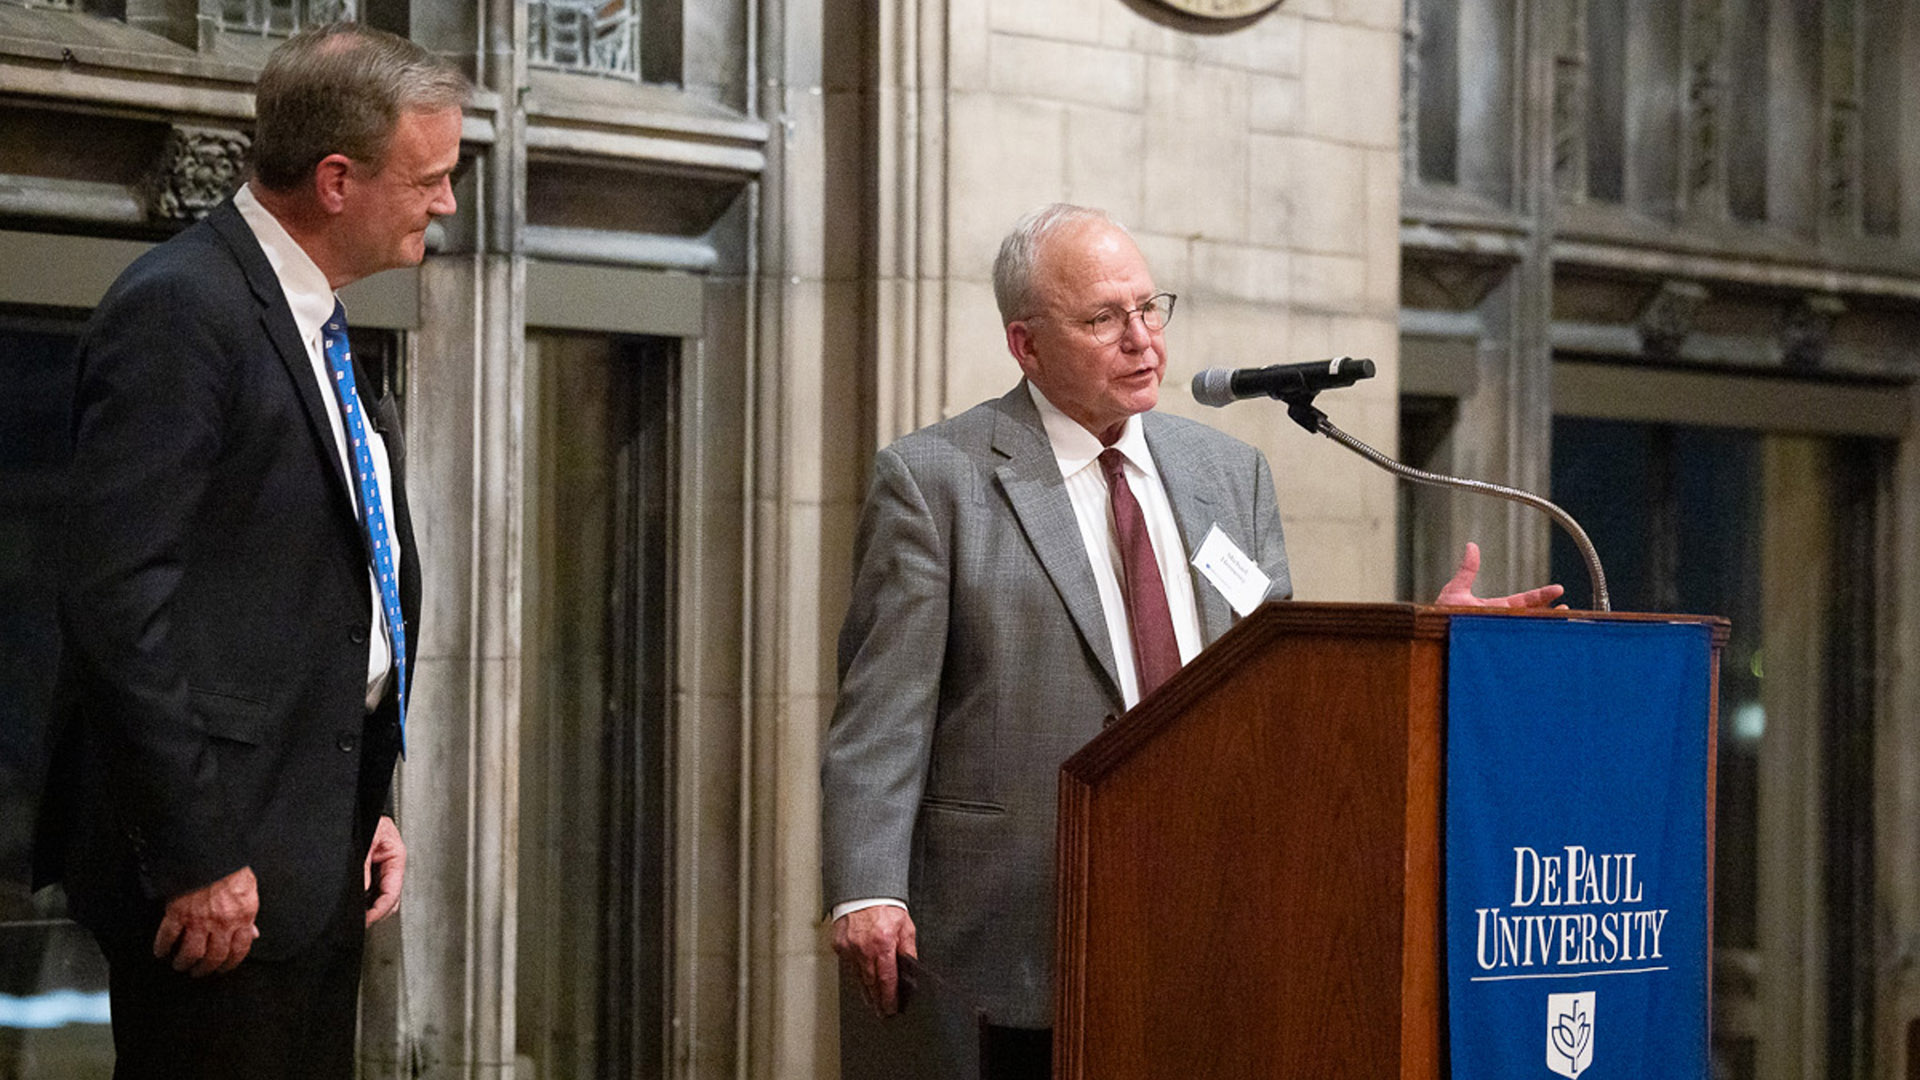 Mike Hennessy, president of the Coleman Foundation from 1995 to 2020 and a key advocate for the creation of the center, speaks as Leech looks on.